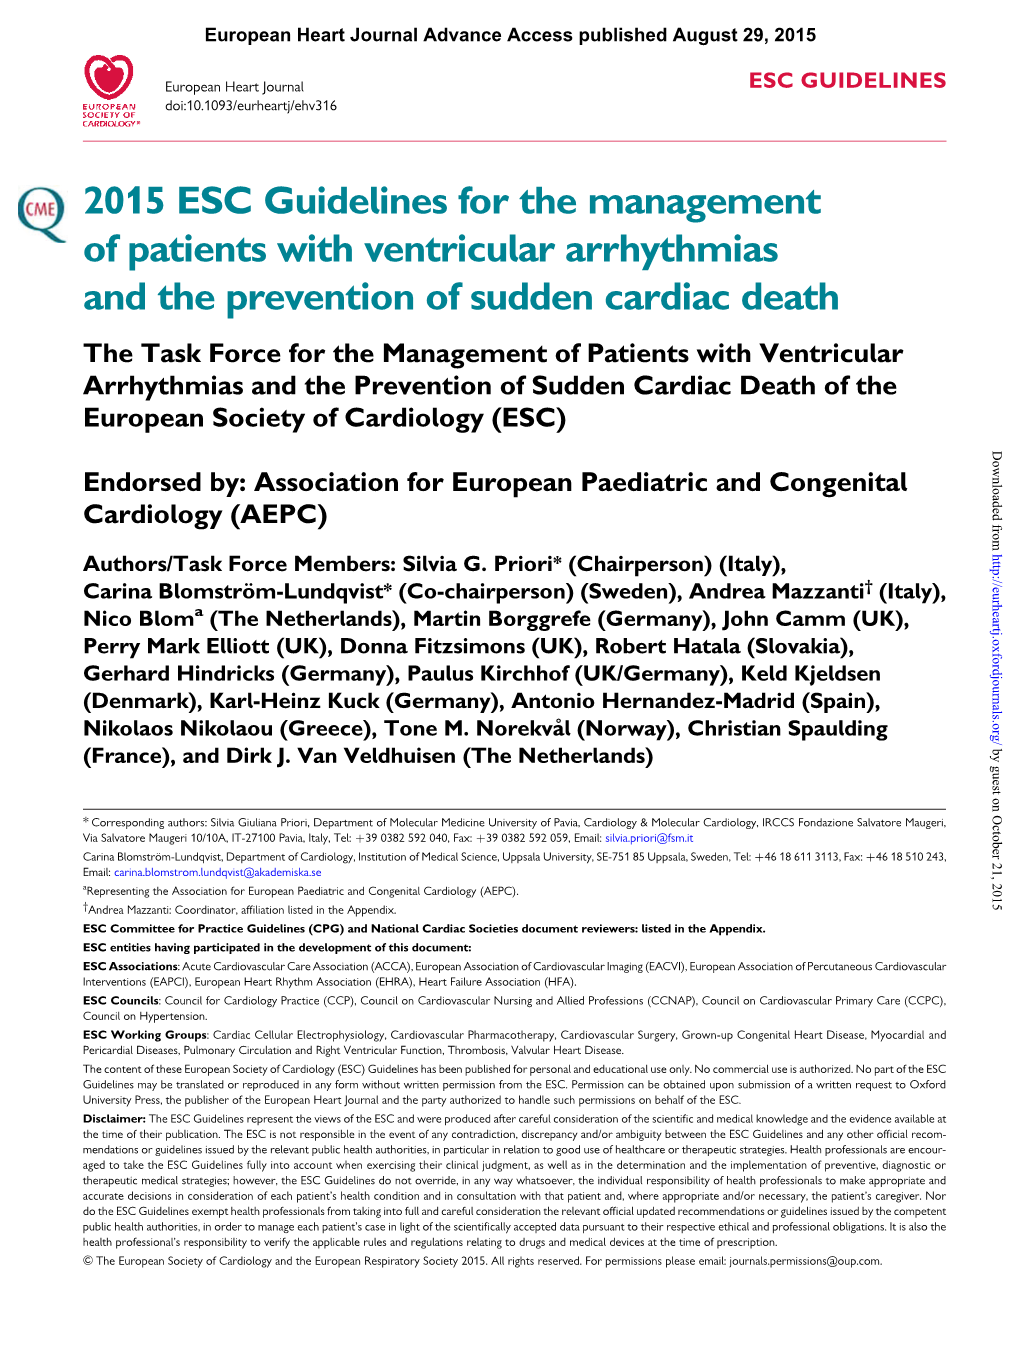 2015 ESC Guidelines for the Management of Patients